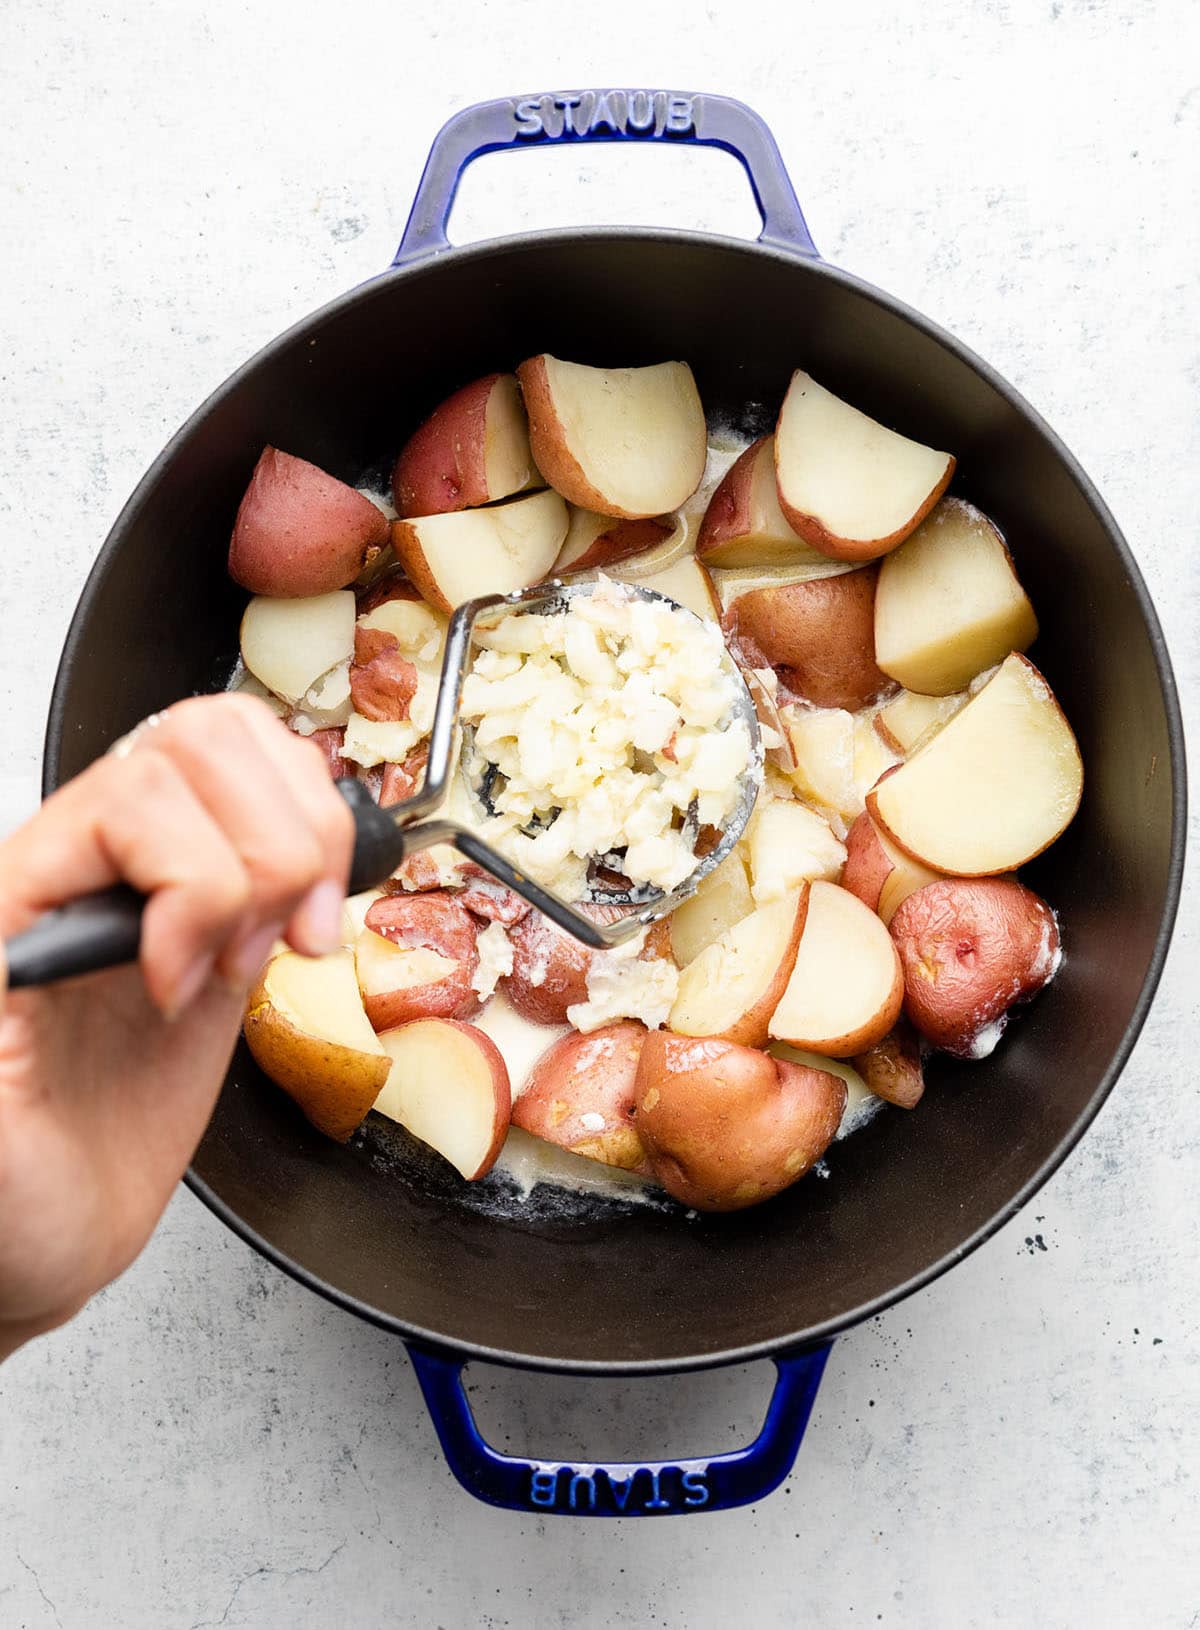 Hand using a potato masher to mash potatoes in a large black pot.